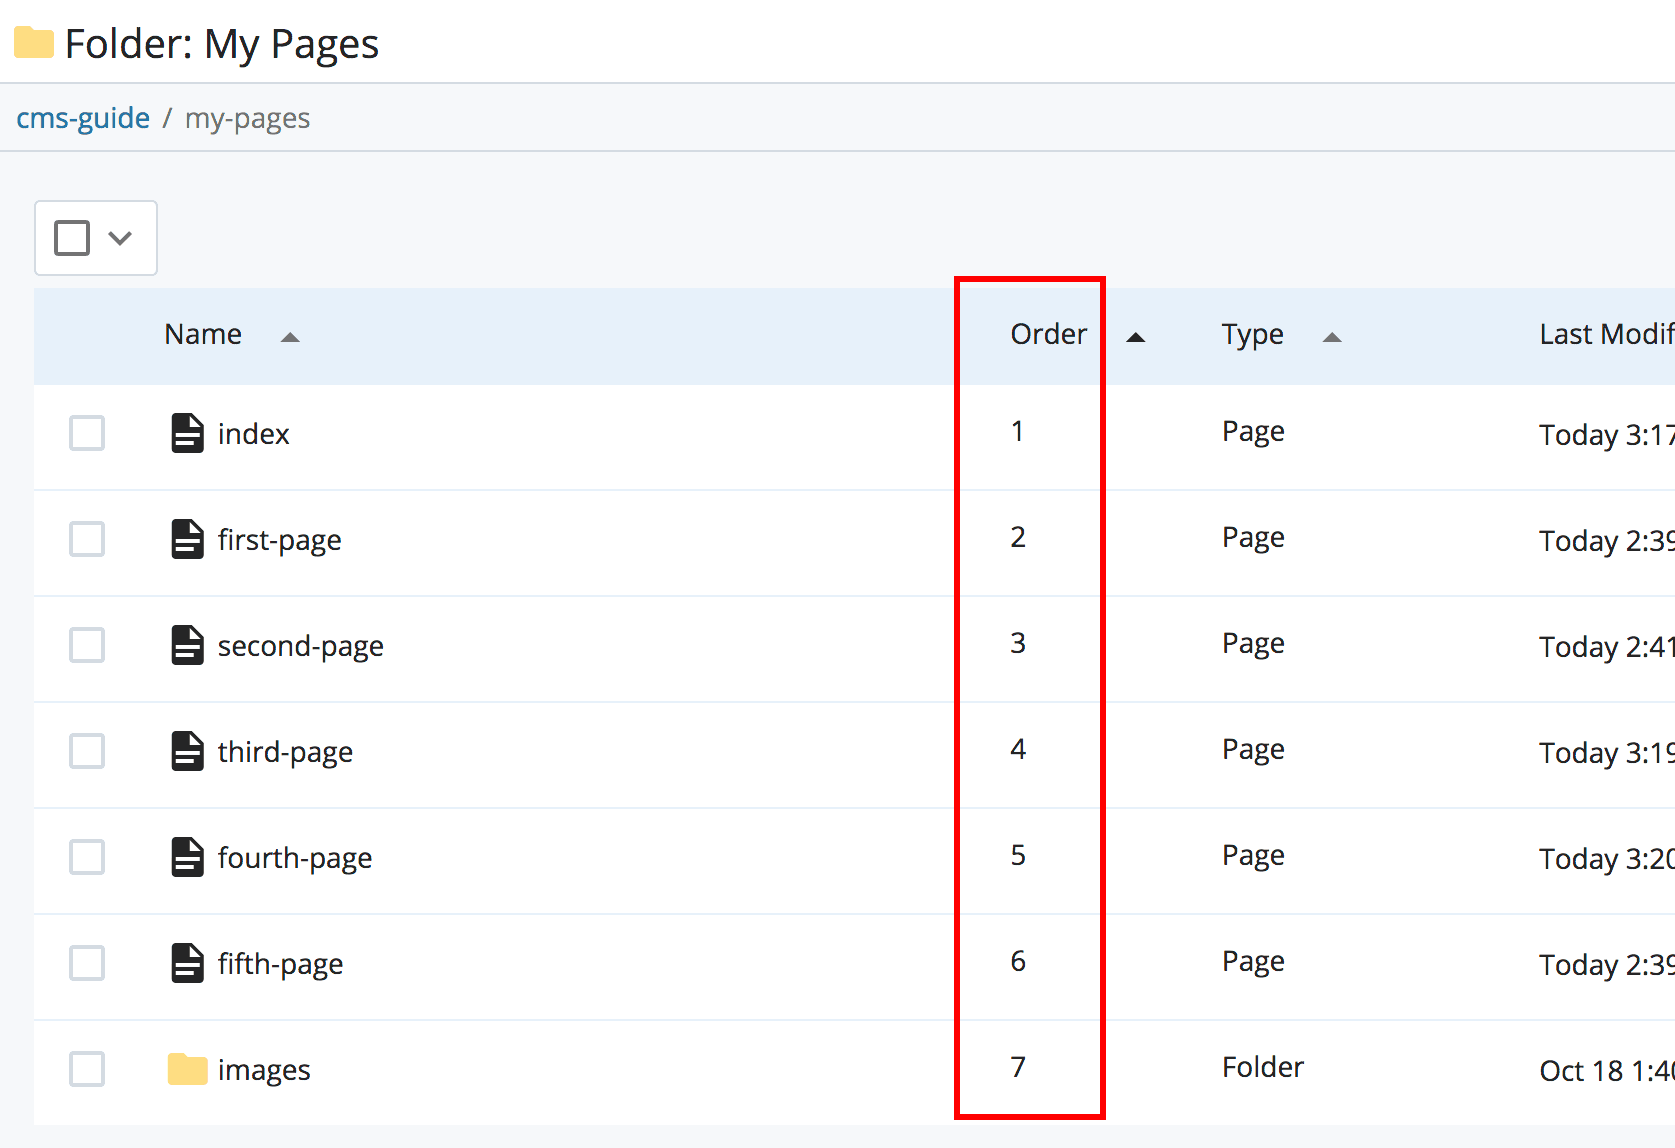 Use the Order column to determine the order of your navigation